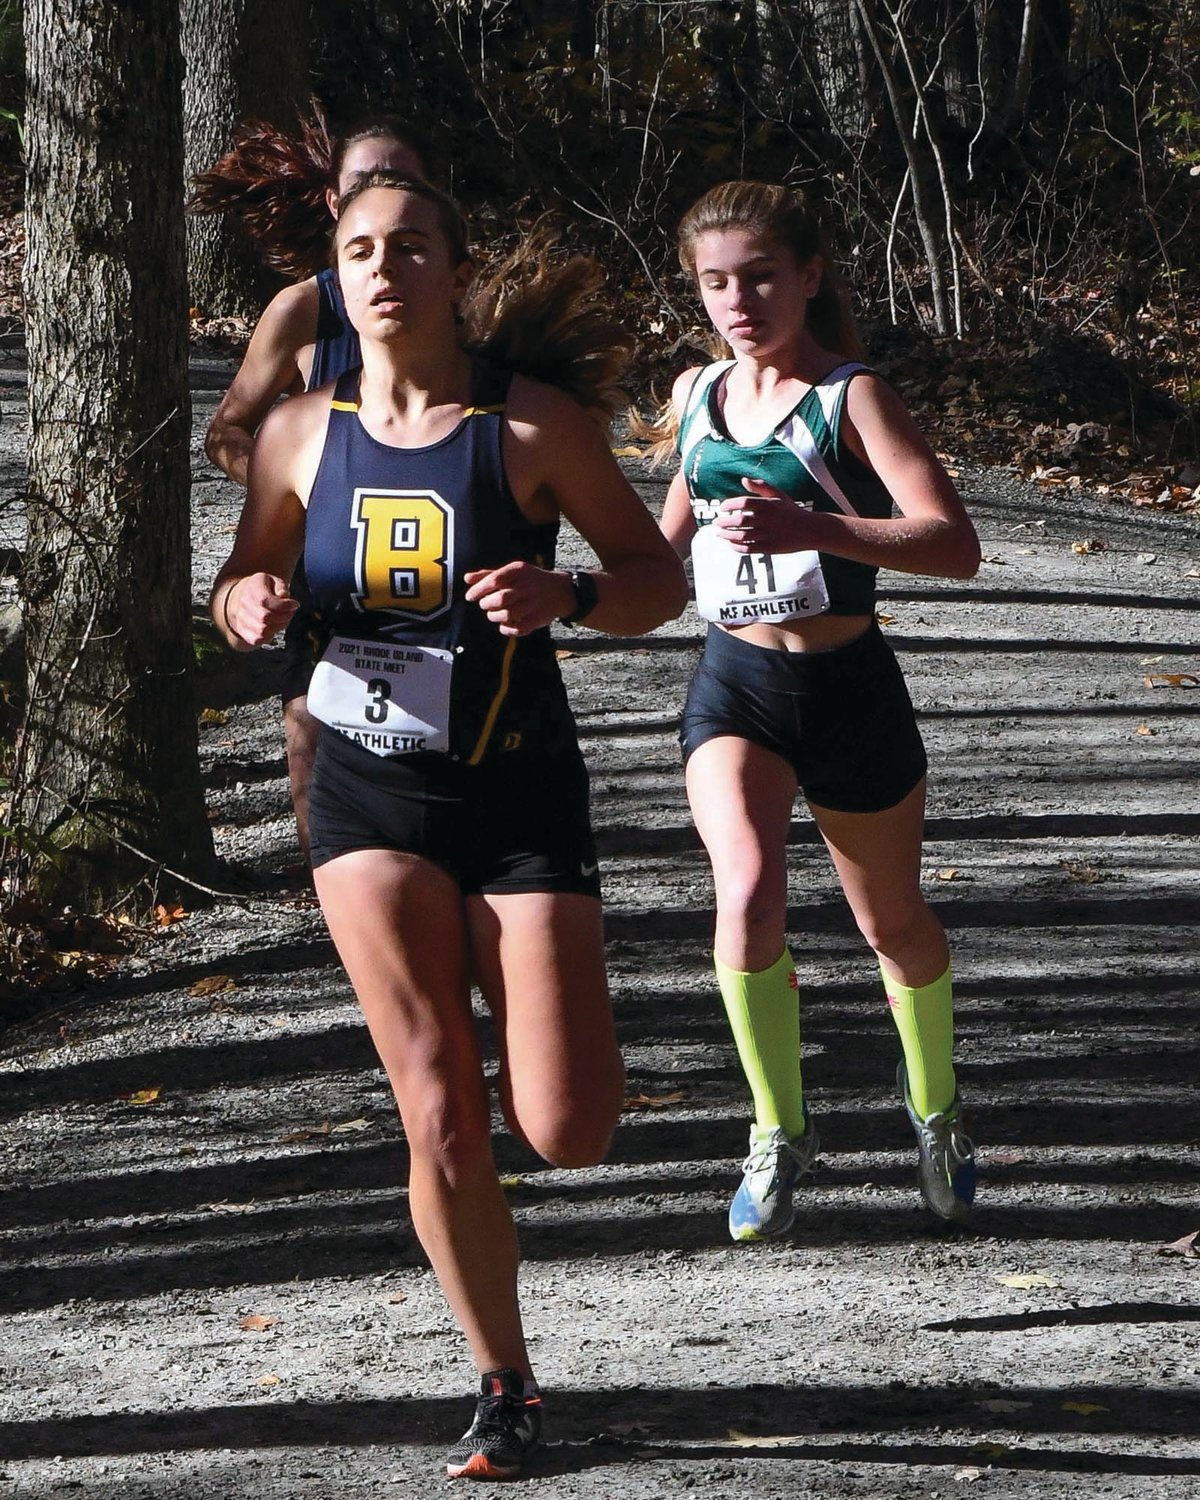 STATE MEET: Cranston
East’s Maddison Dutra
runs along the course at
Ponaganset High School
during last week’s state
championship meet. The
Lady Bolts had a solid outing,
finishing eighth place
overall.